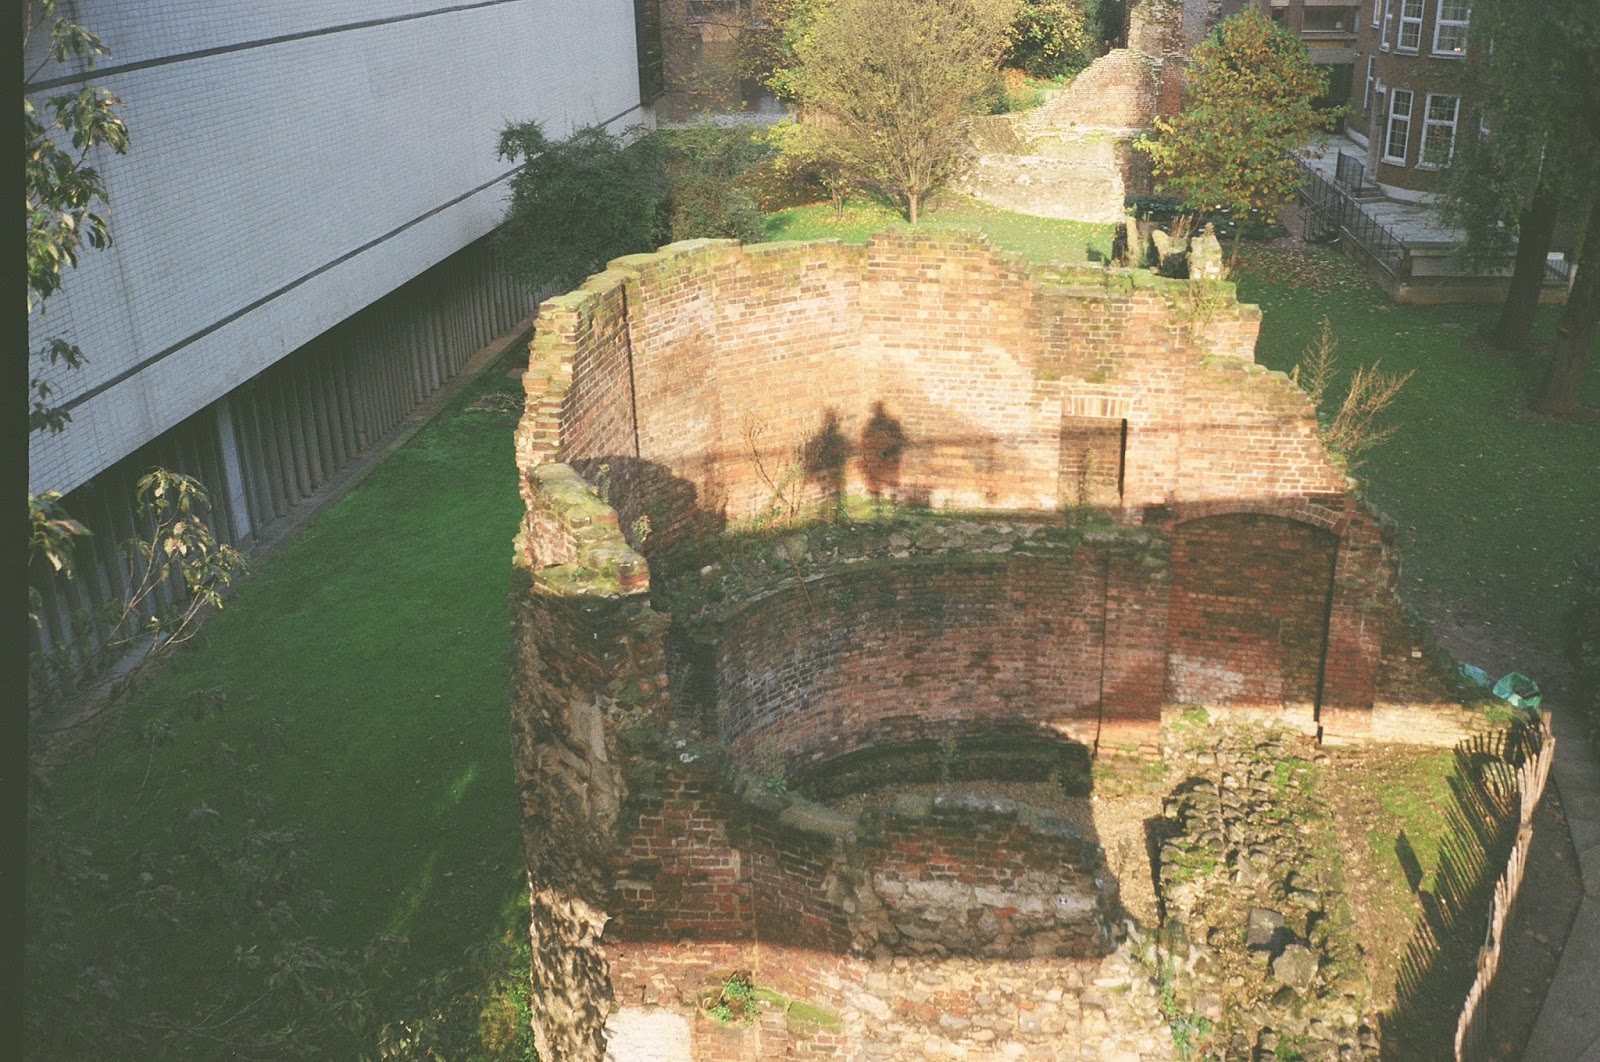 LONDON WALL, CITY OF LONDON, BARBICAN, ANCIENT RUINS, SHADOWS, ARCHAEOLOGY, MUSEUM OF LONDON,2015 GENERAL ELECTION, © VAC 100 DAYS 4 MILLION CONVERSATIONS